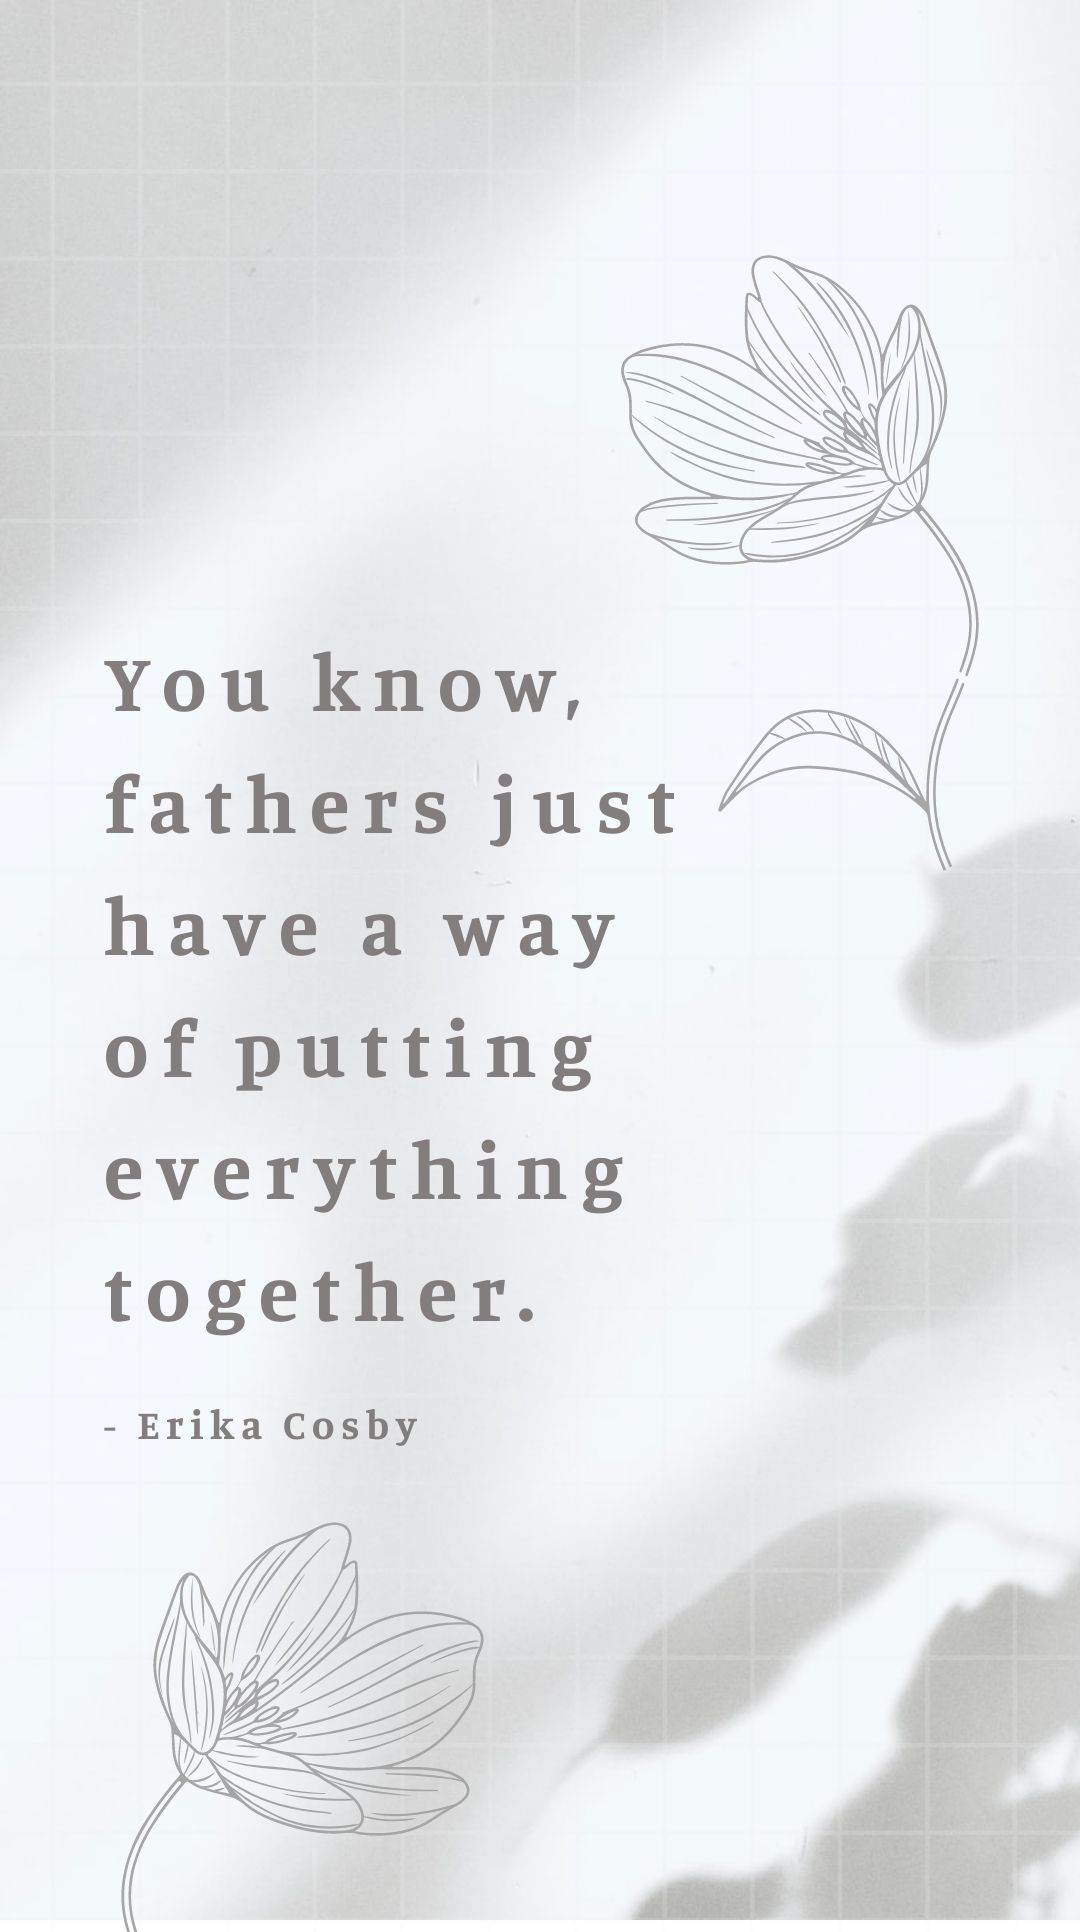 Erika Cosby - You know, fathers just have a way of putting everything together.